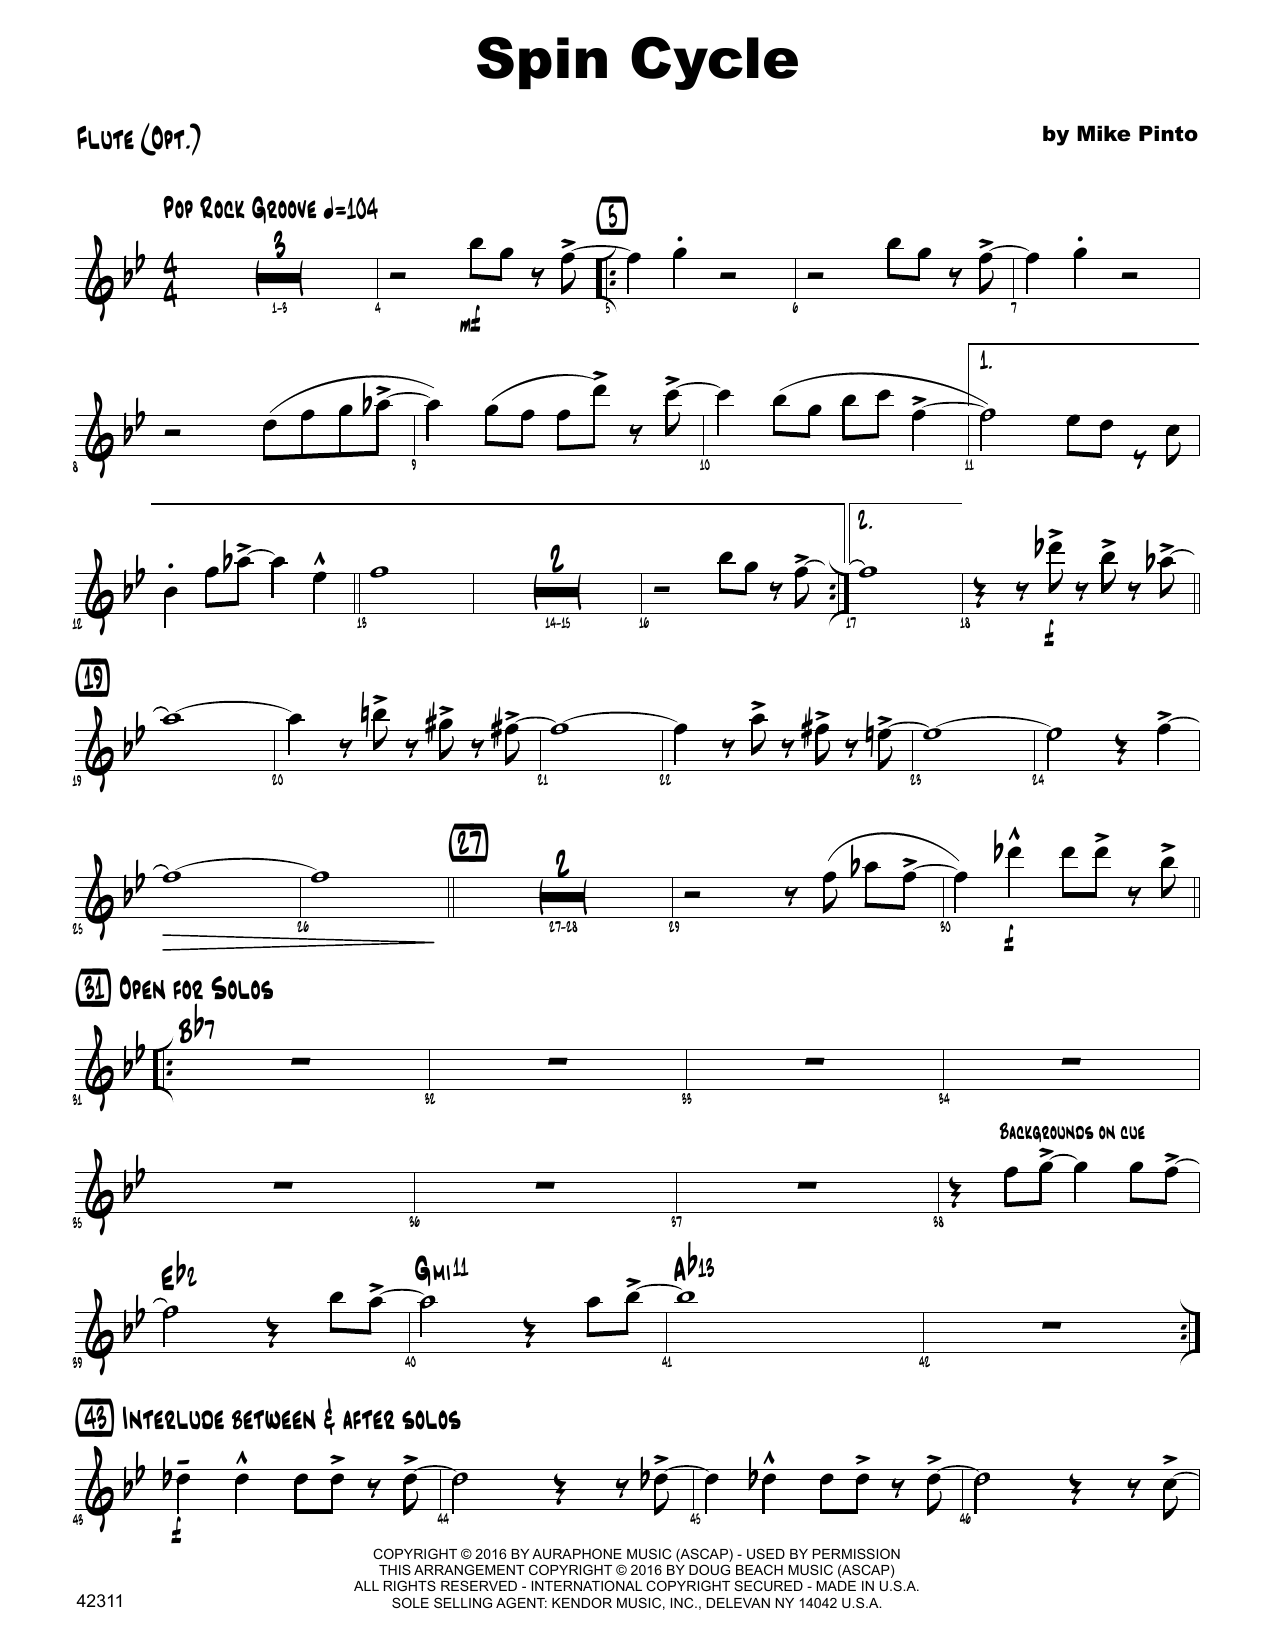 Download Mike Pinto Spin Cycle - Flute Sheet Music